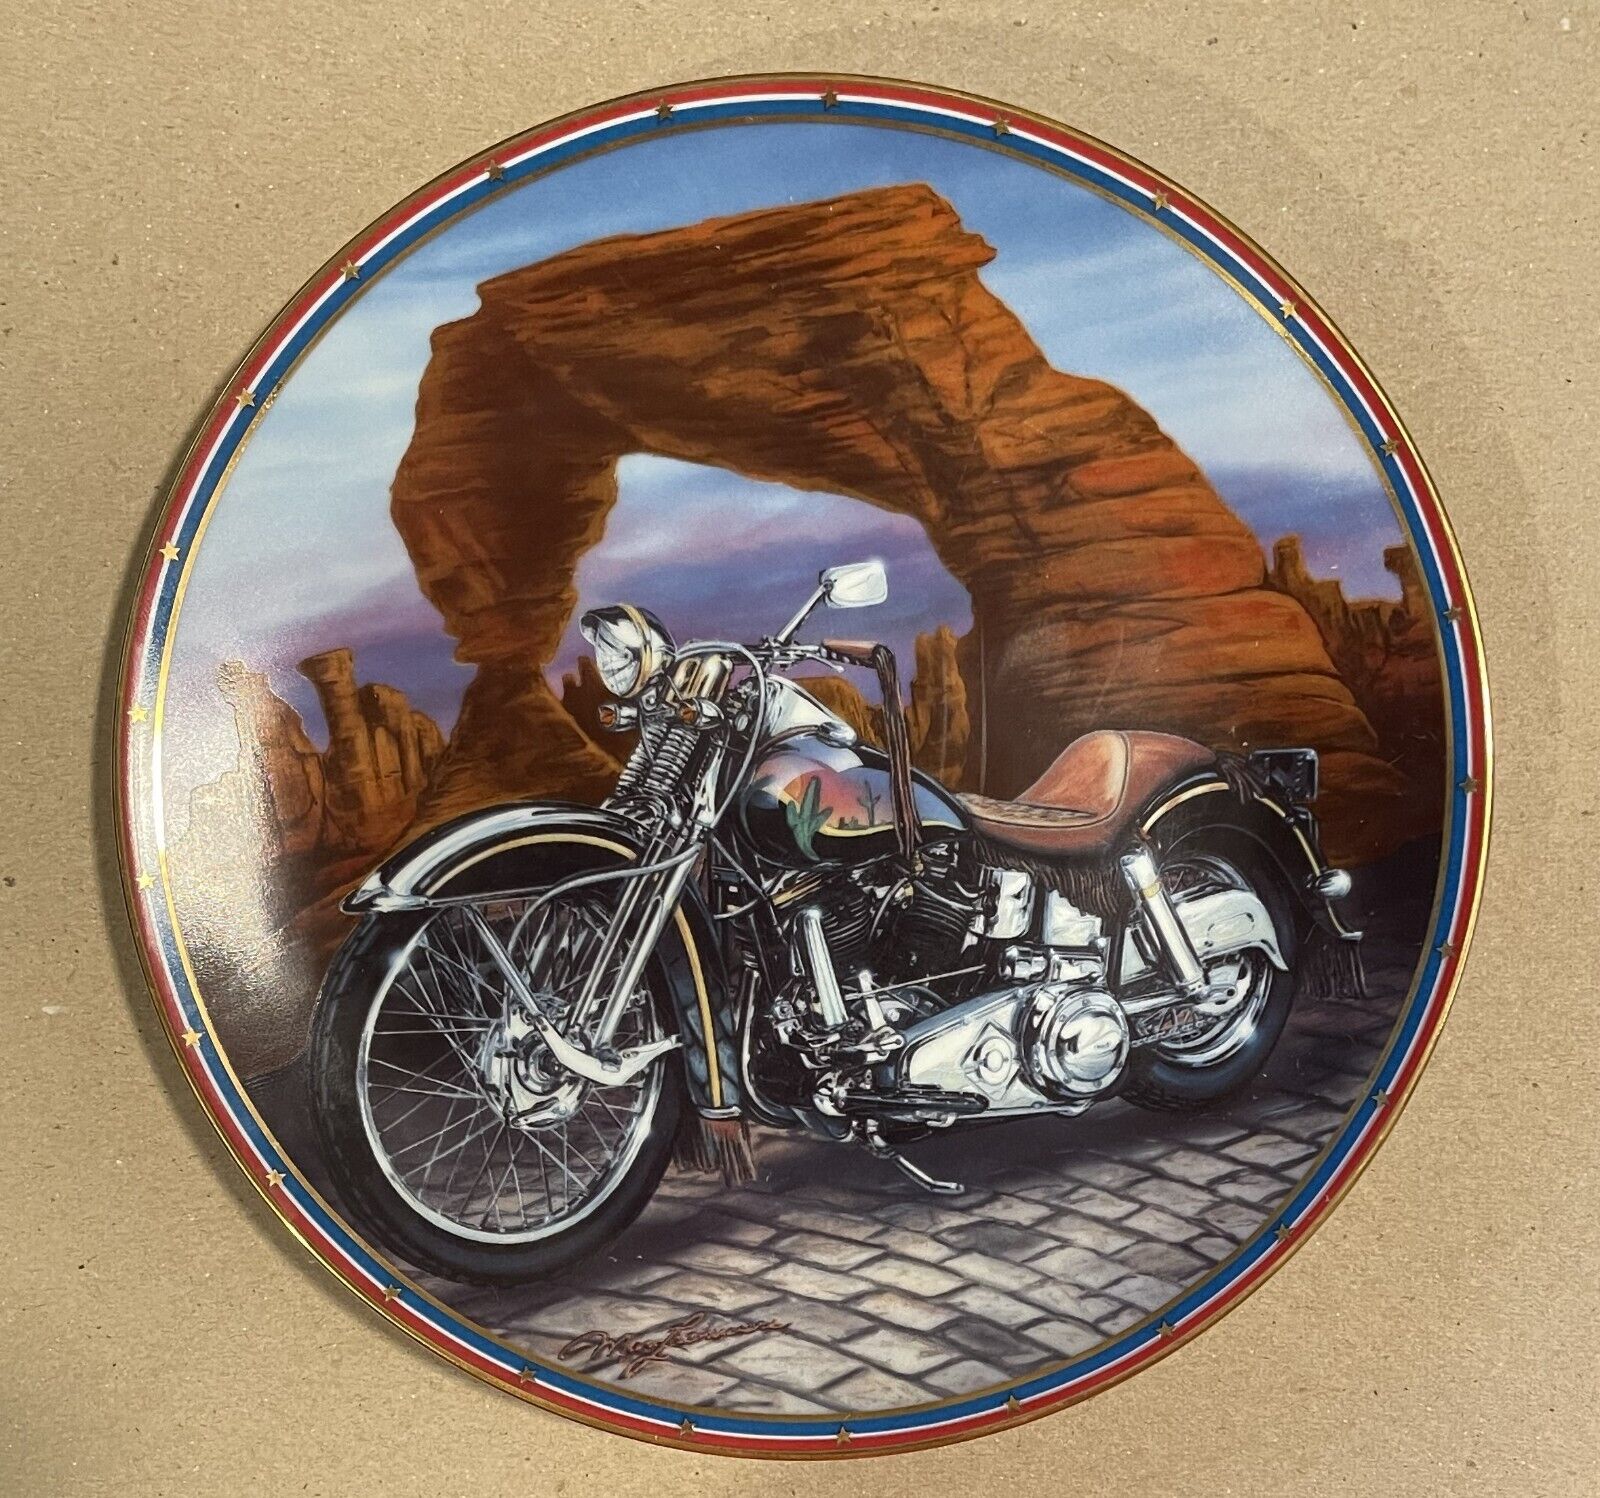 EASYRIDERS PLATE COLLECTION. DAVID MANN. 1995. PRODUCTION ADVANCE PLATE. DRAKE S